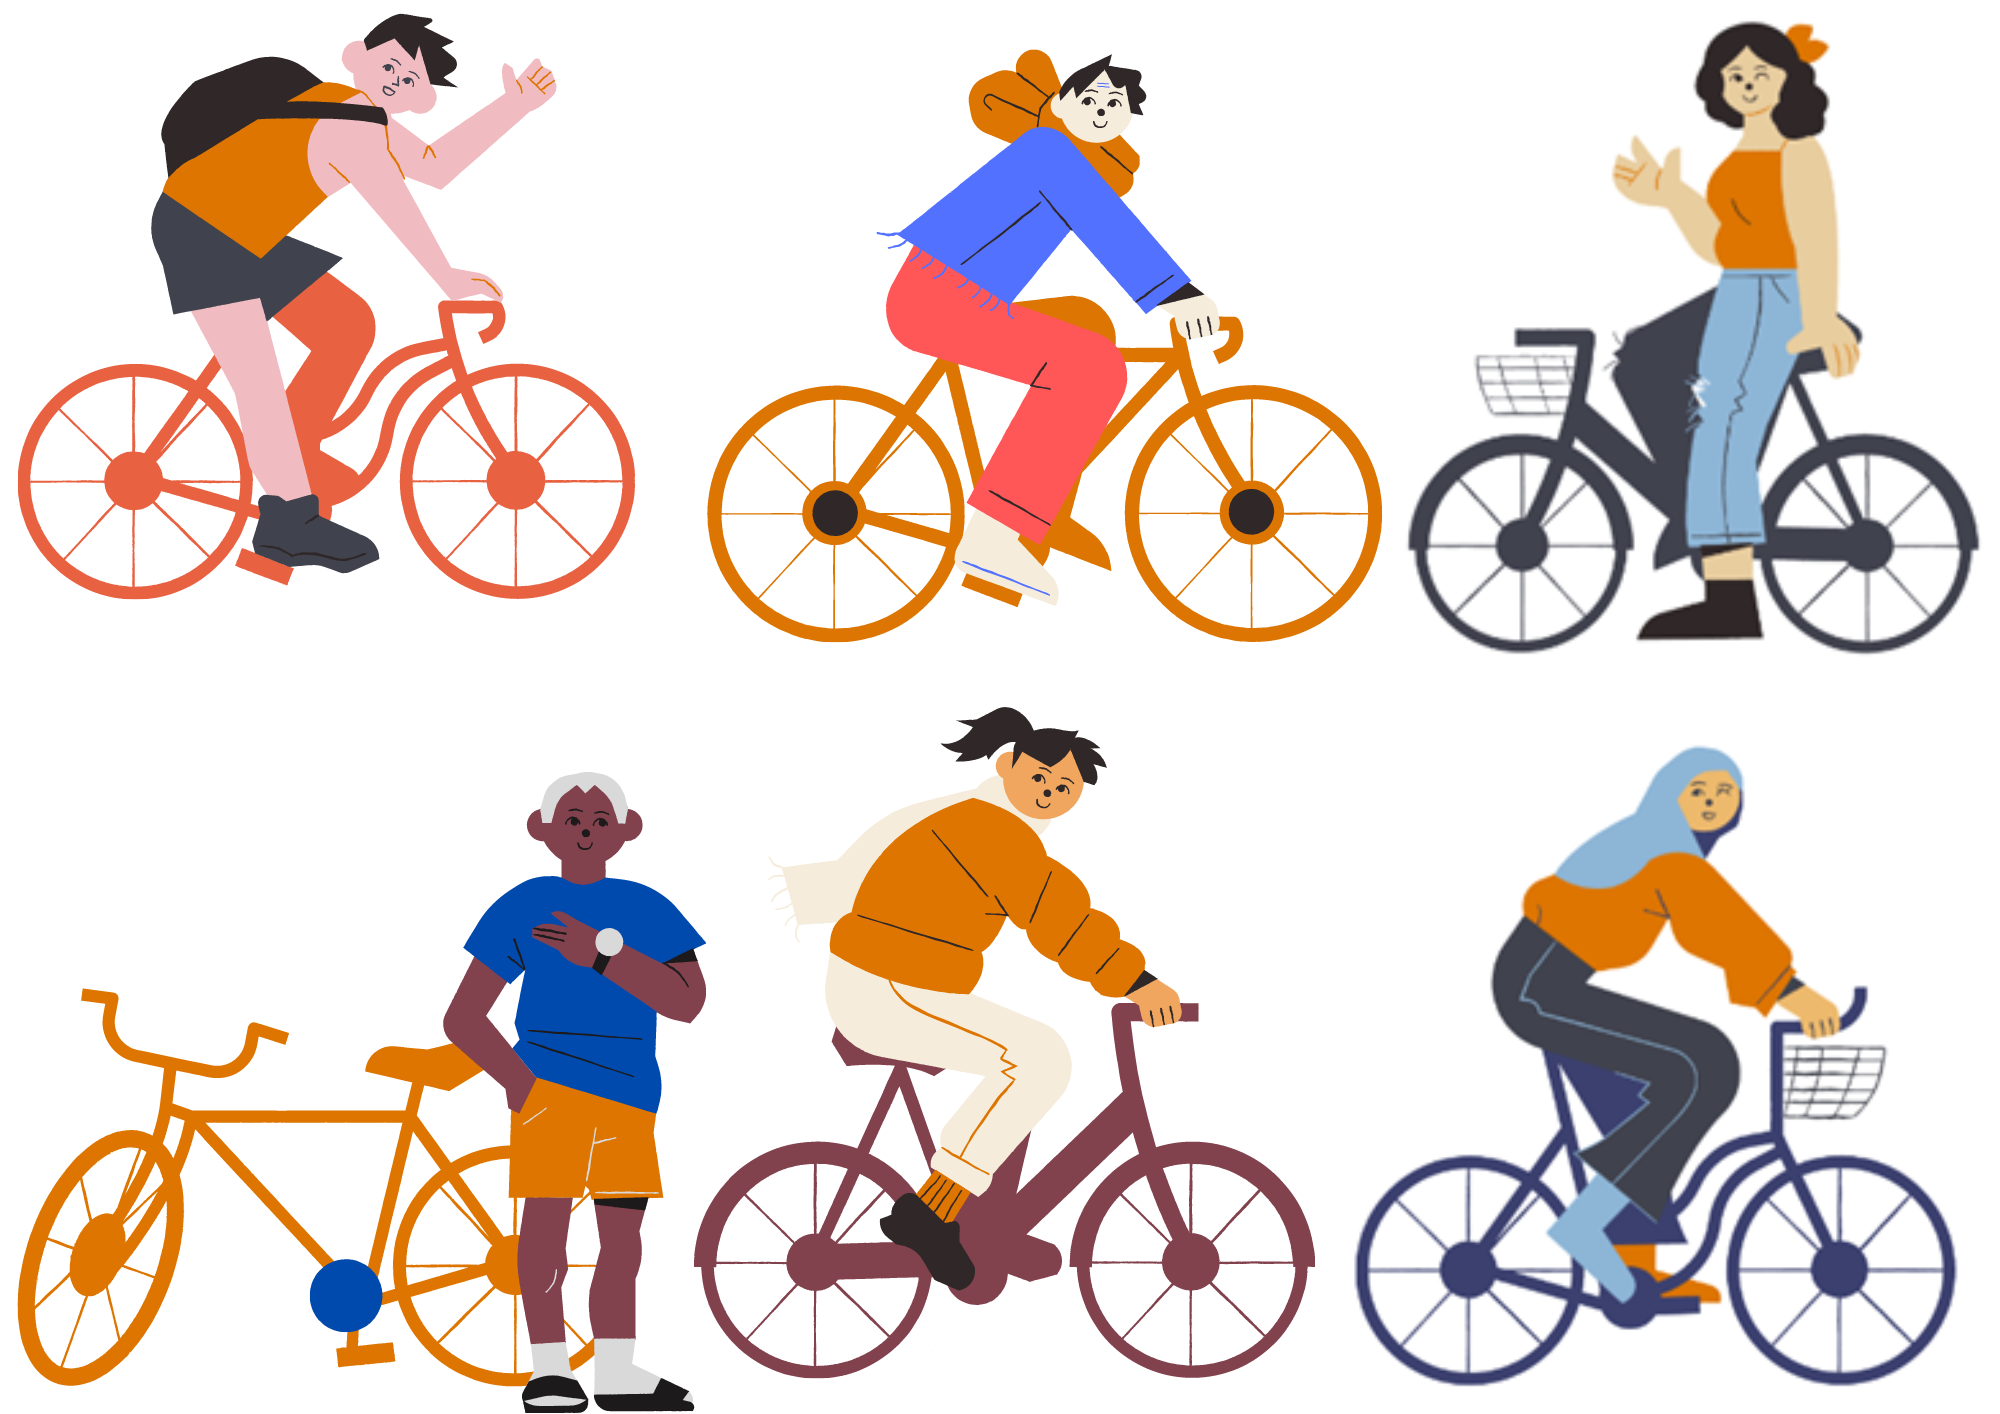 Illustration of cyclists